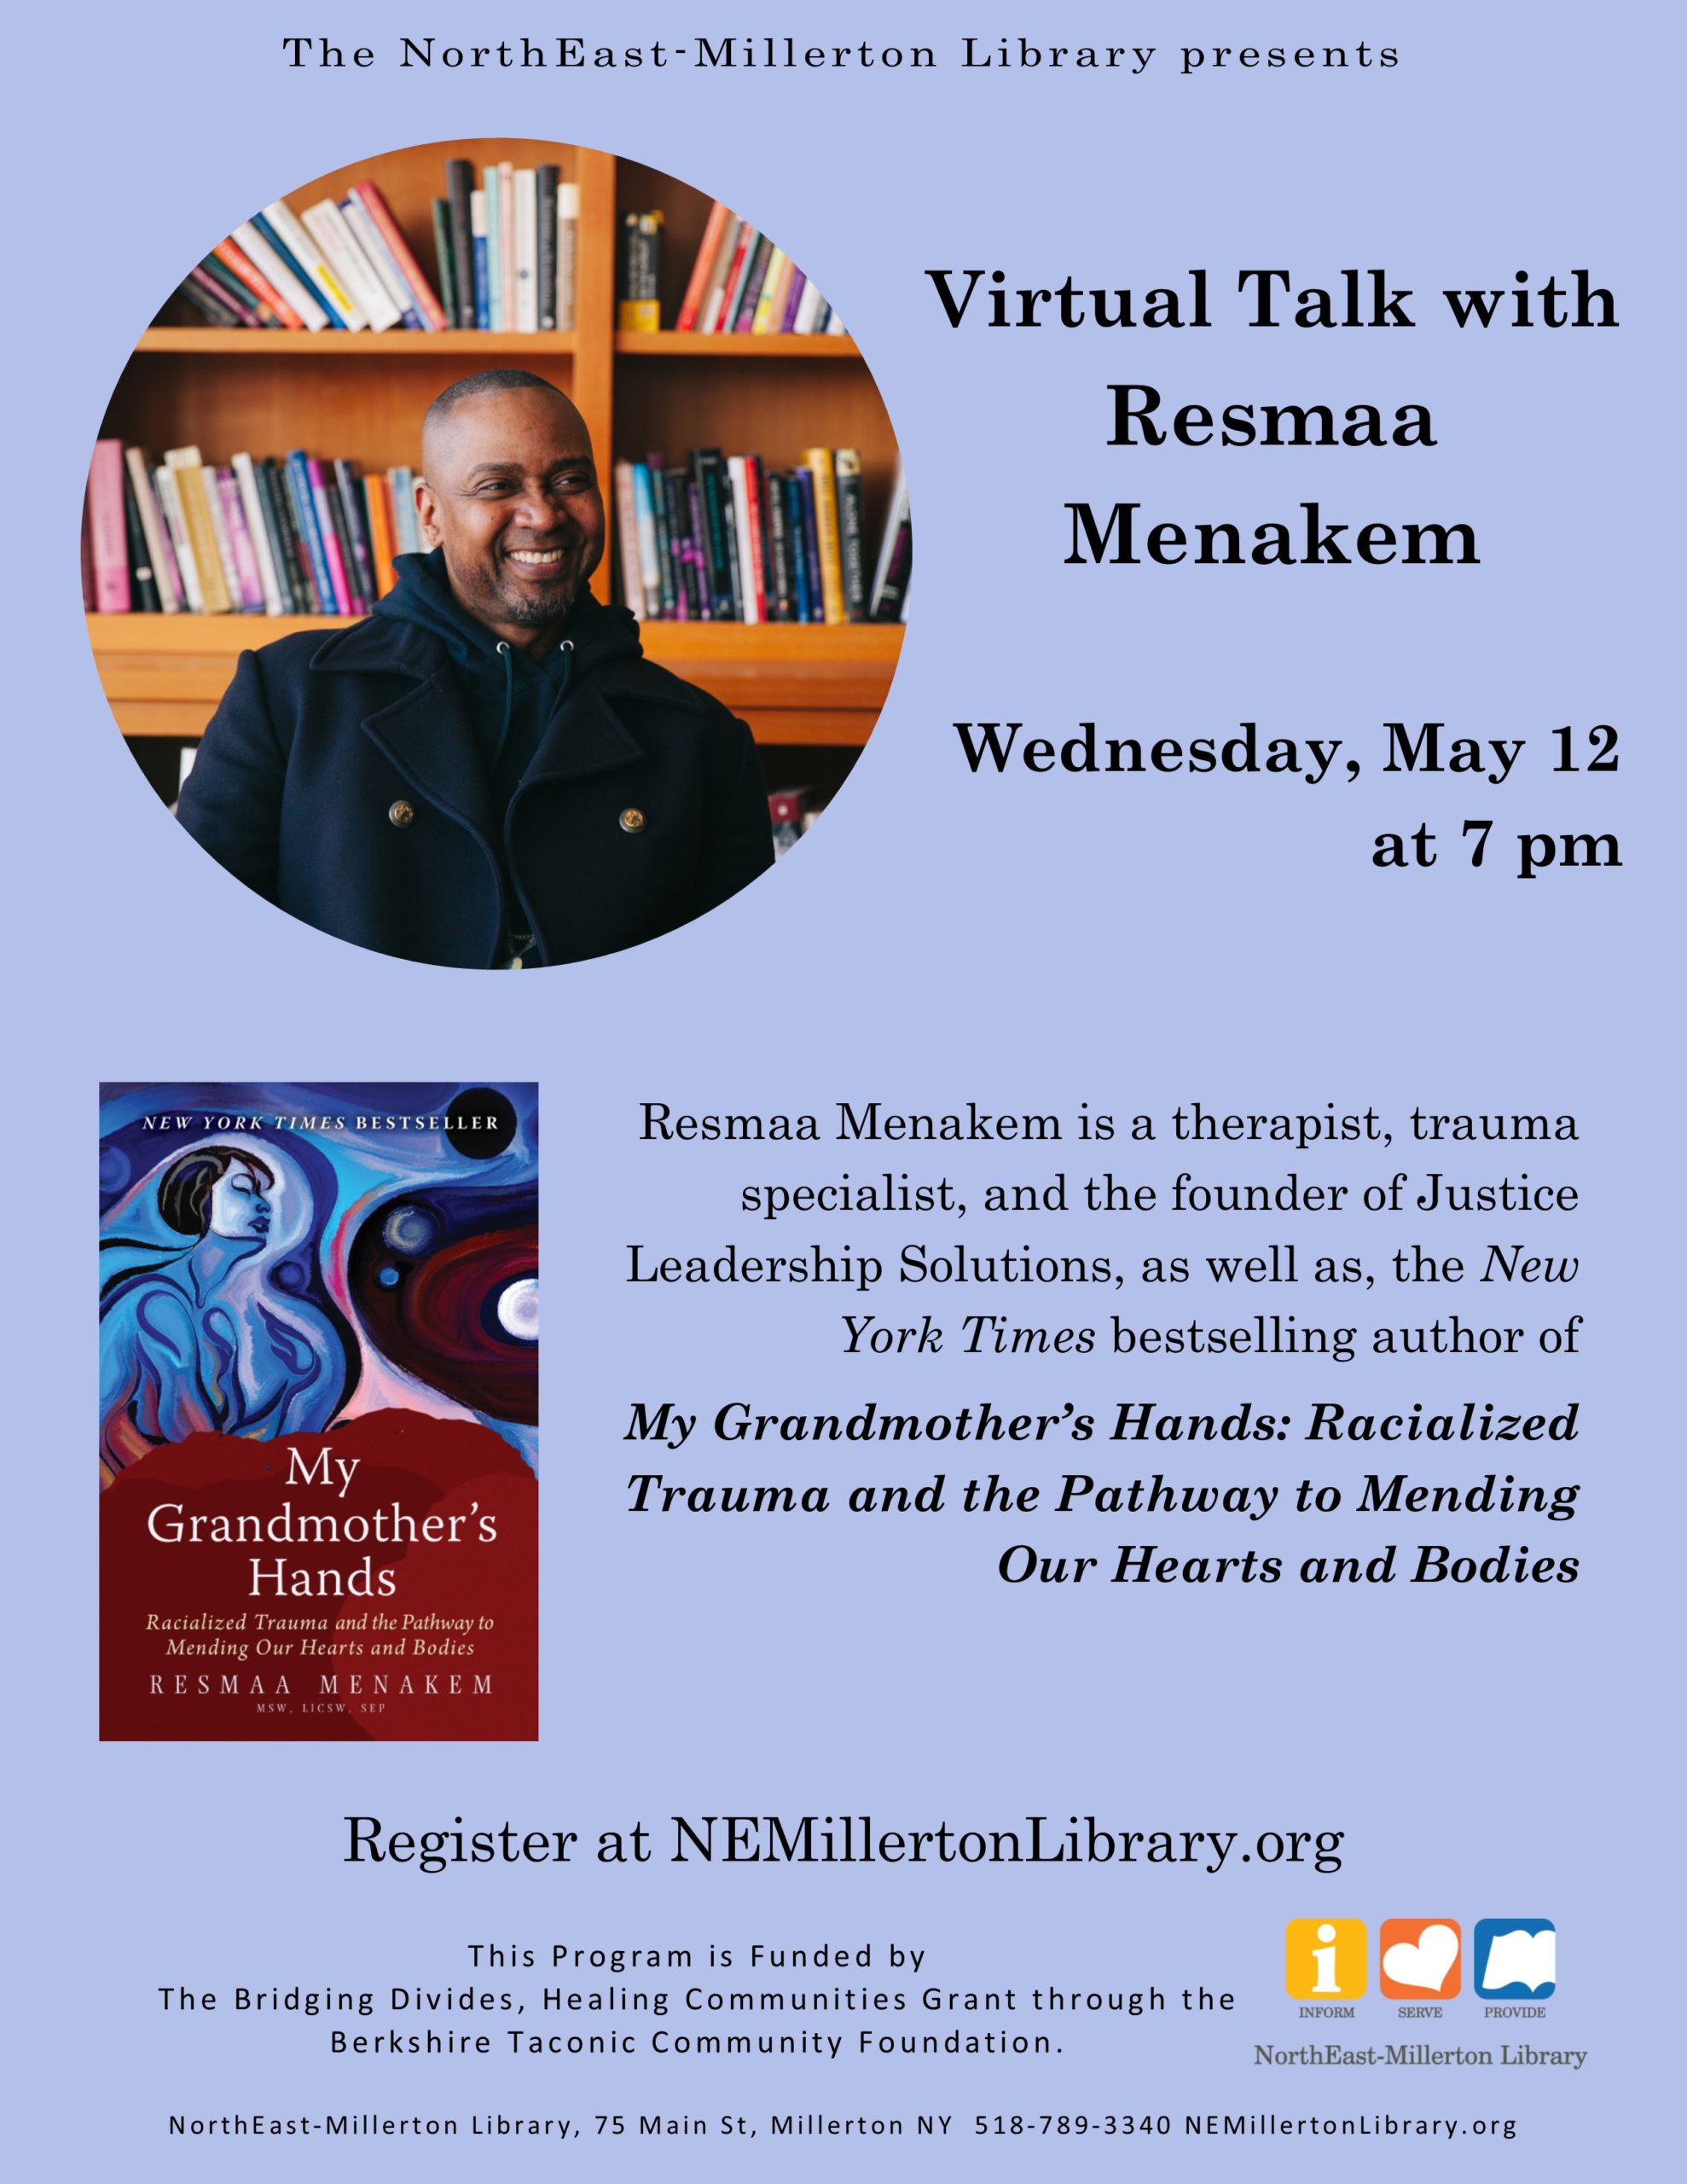 Virtual Talk with Resmaa Menakem Wednesday, May 12 at 7 pm RSVP